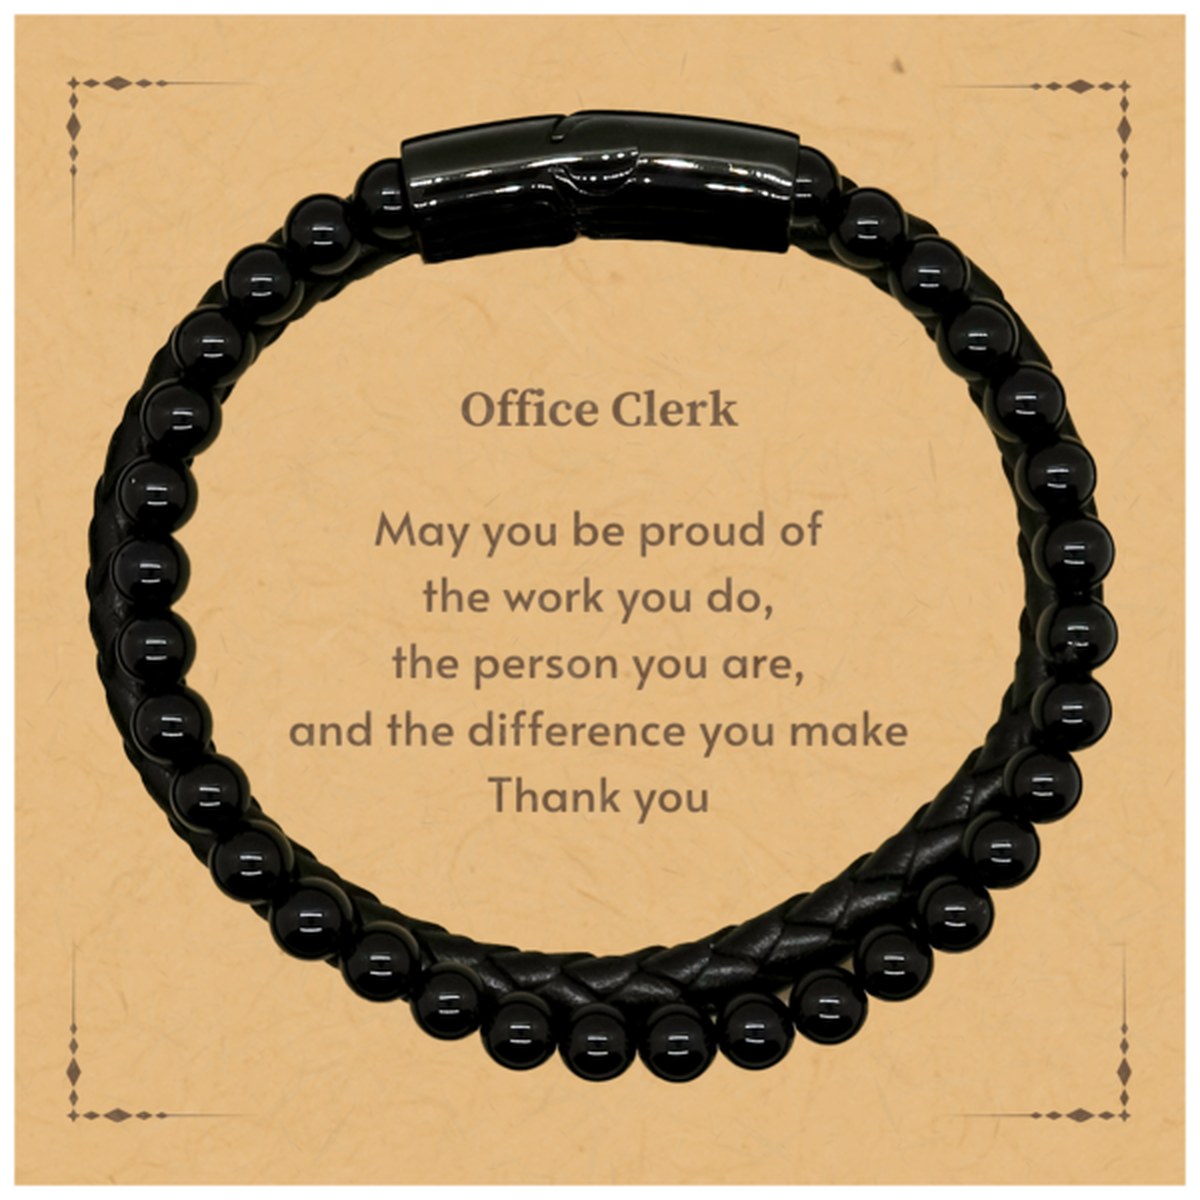 Heartwarming Stone Leather Bracelets Retirement Coworkers Gifts for Office Clerk, Office Clerk May You be proud of the work you do, the person you are Gifts for Boss Men Women Friends